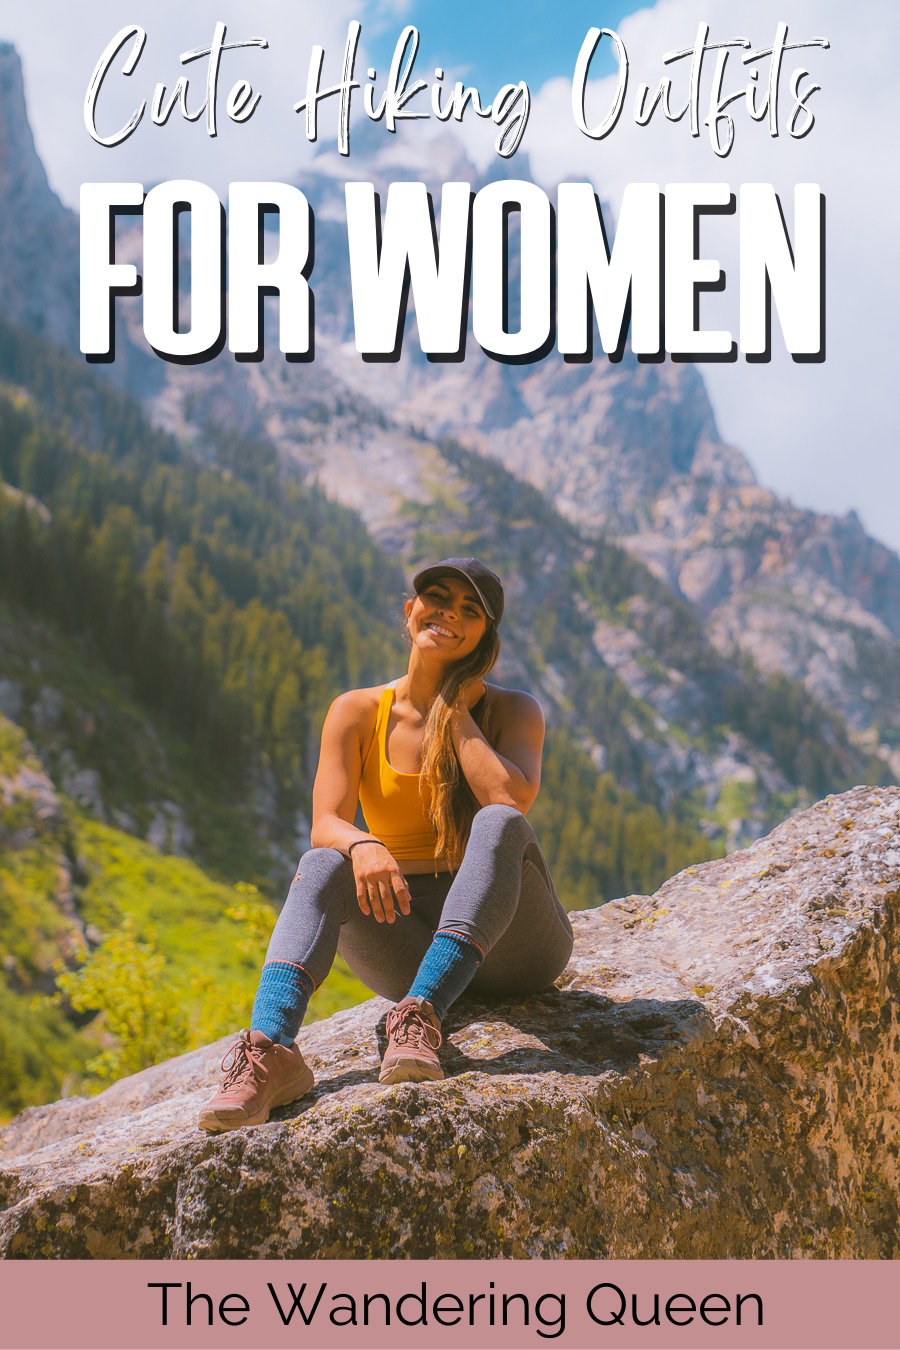 Fitness inspiration  Hiking outfit women, Summer hiking outfit, Hiking  outfit